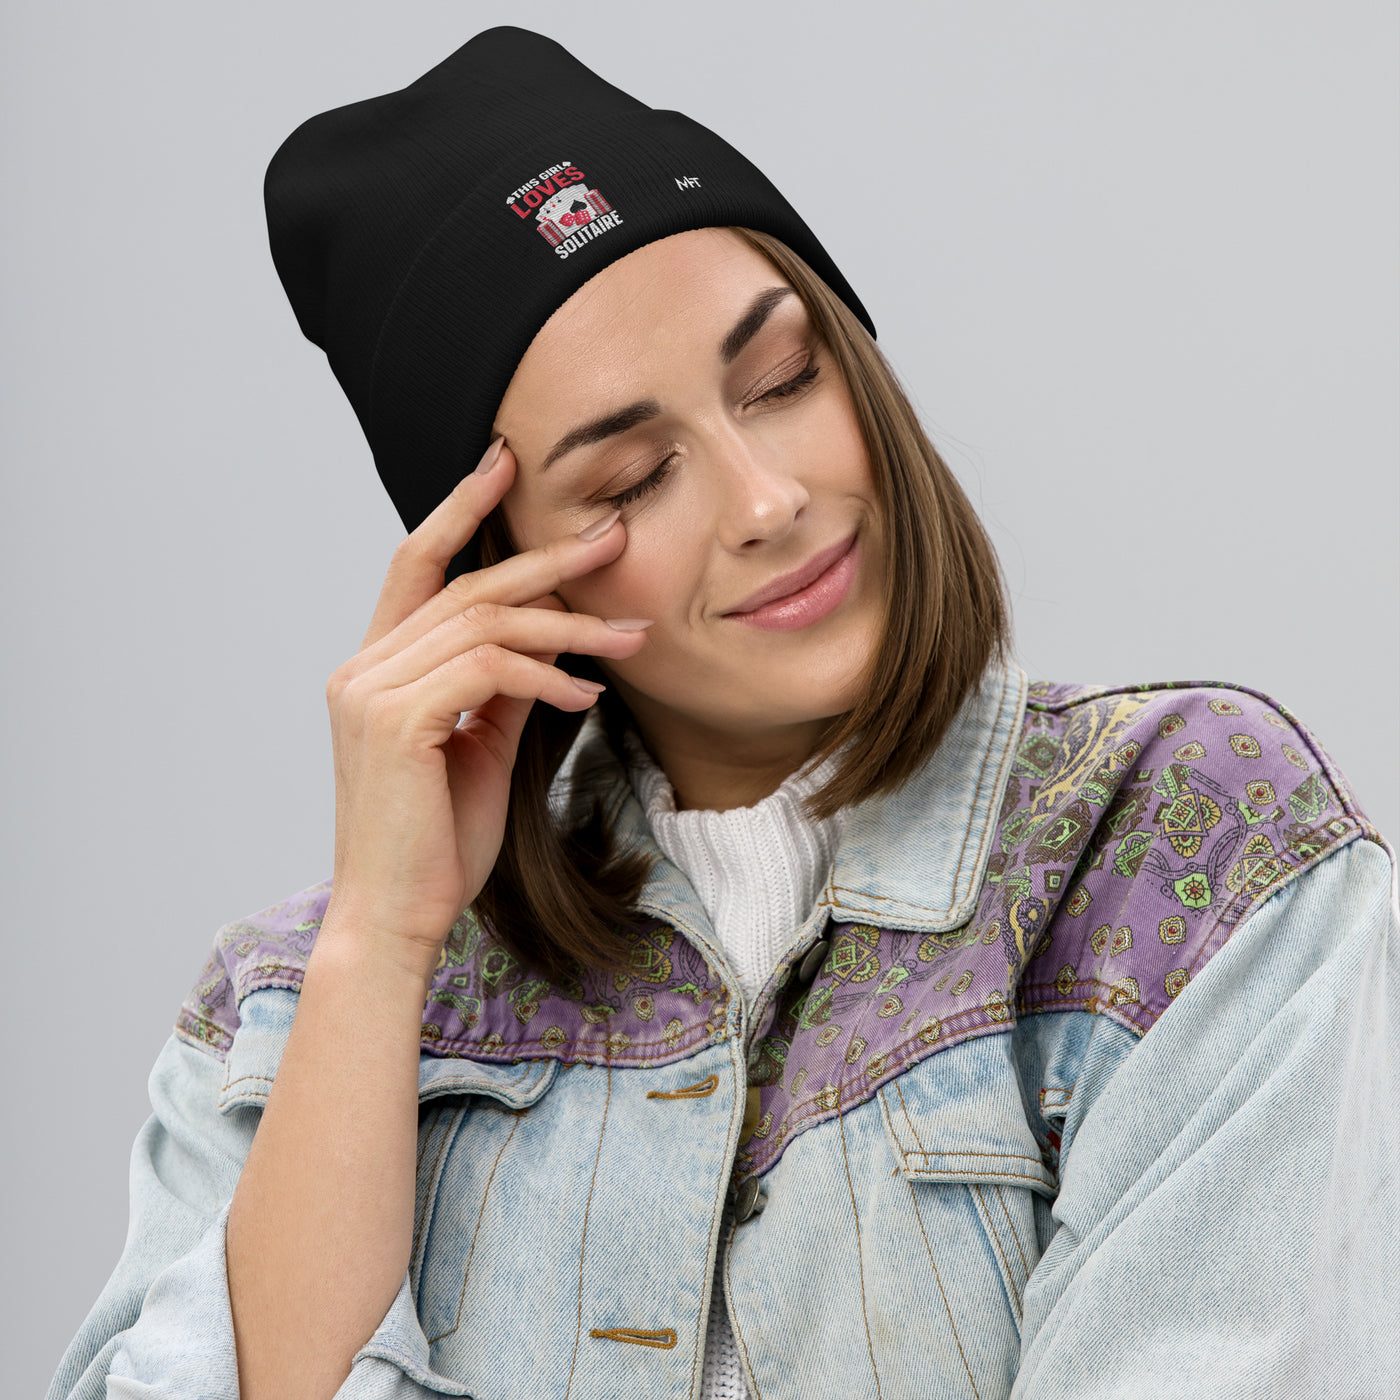 This Girl Loves  Solitaire - Embroidered Beanie